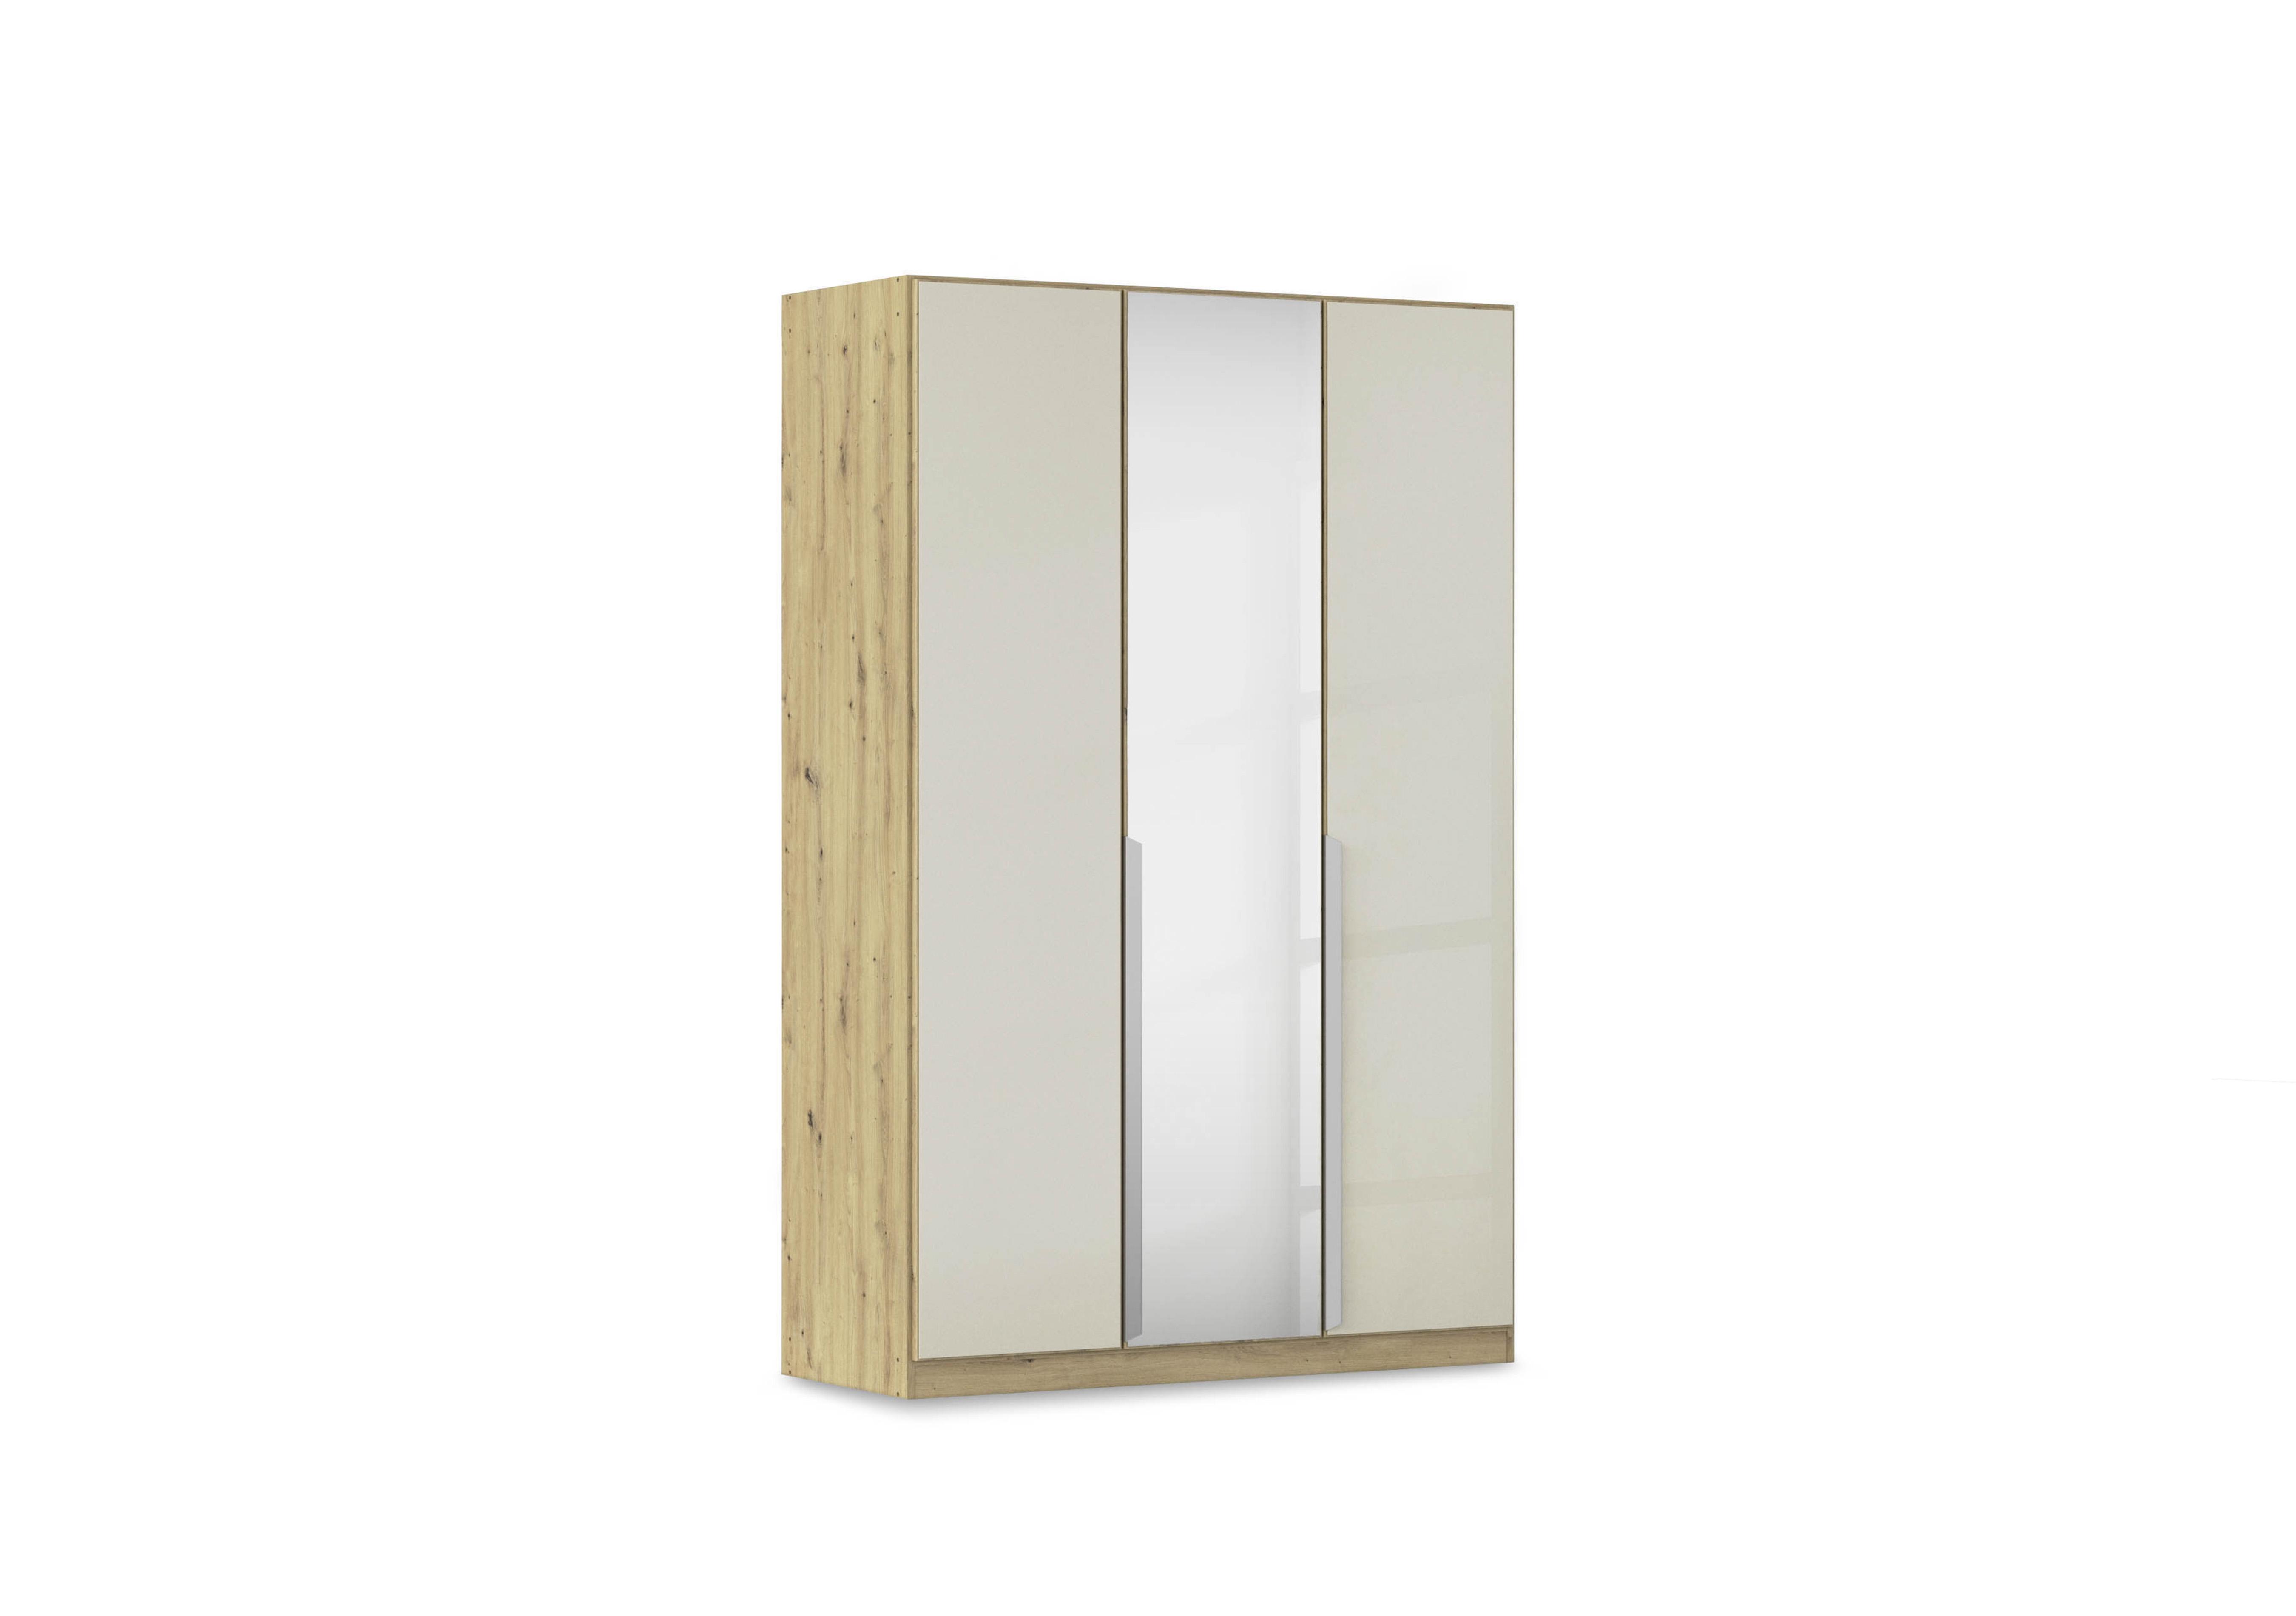 Freja 136cm 3 Door Hinged Glass Wardrobe With Mirror Door in Ag732 Champagne Glass on Furniture Village